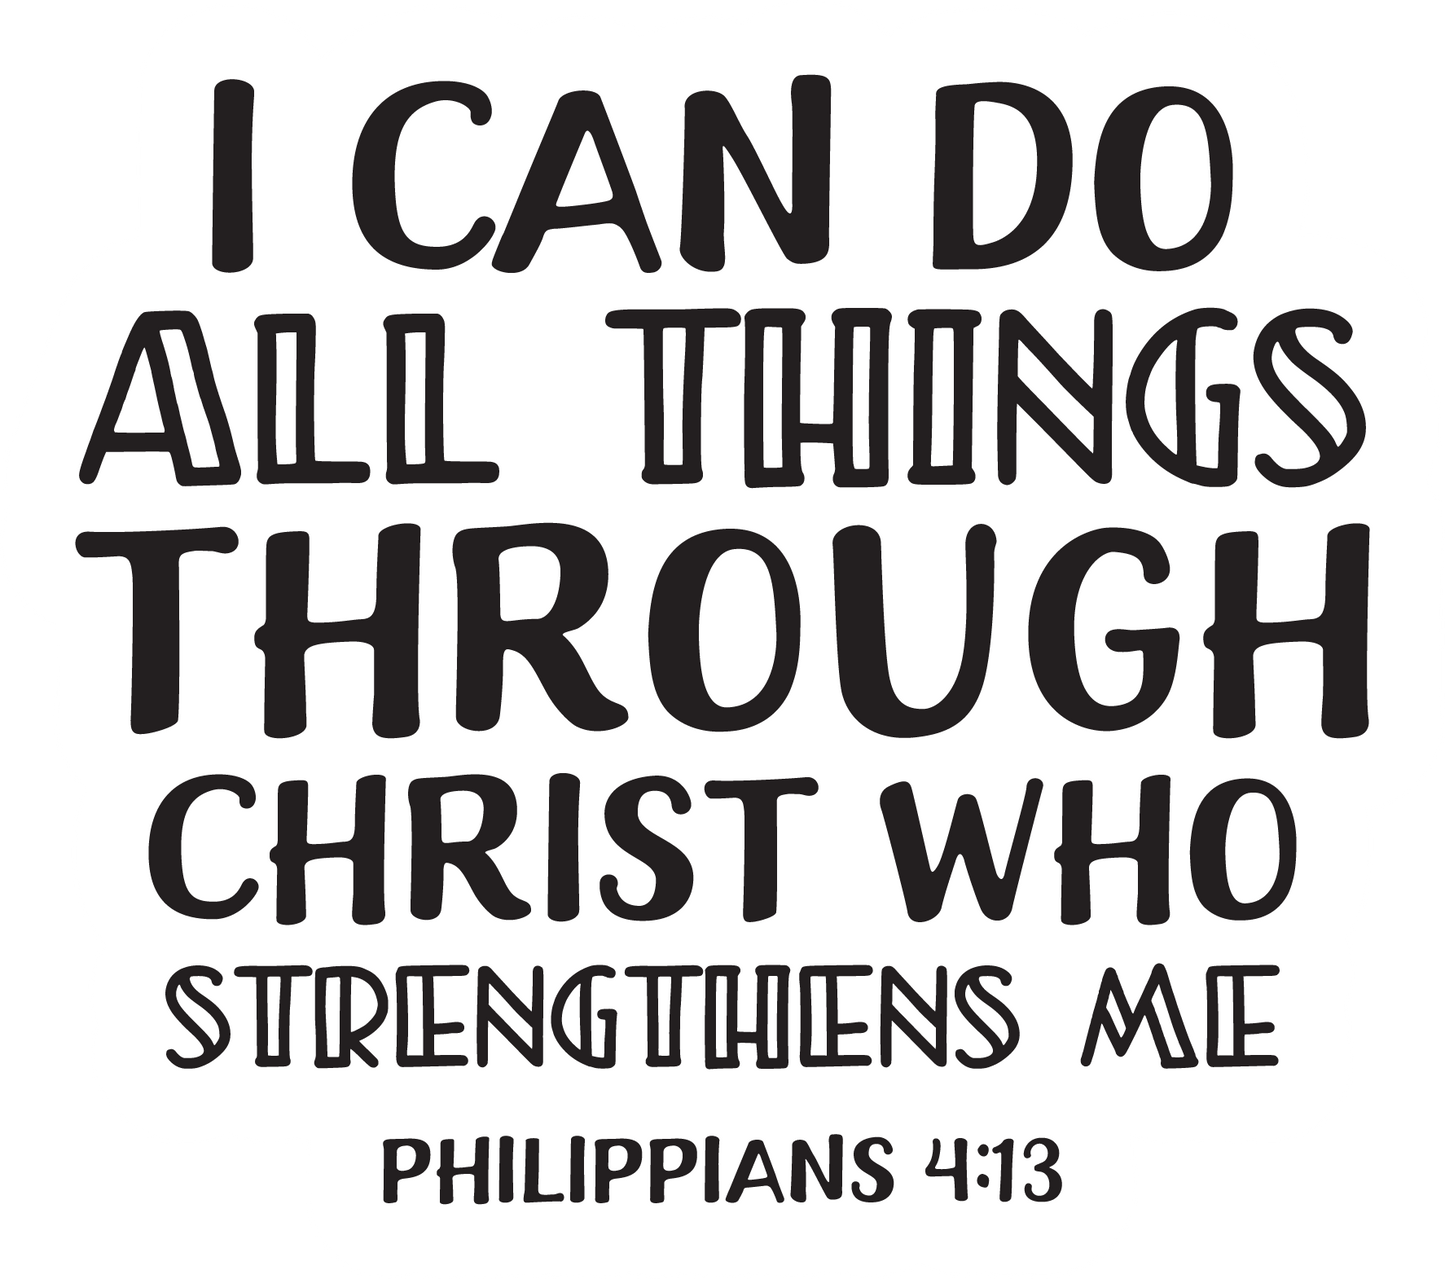 Inspirational Quote "I Can Do All Things Through Christ Who Strengthens Me PHILIPPIANS 4 : 13" Motivational Sticker Vinyl Decal Motivation Stickers- 5" Vinyl Sticker Waterproof